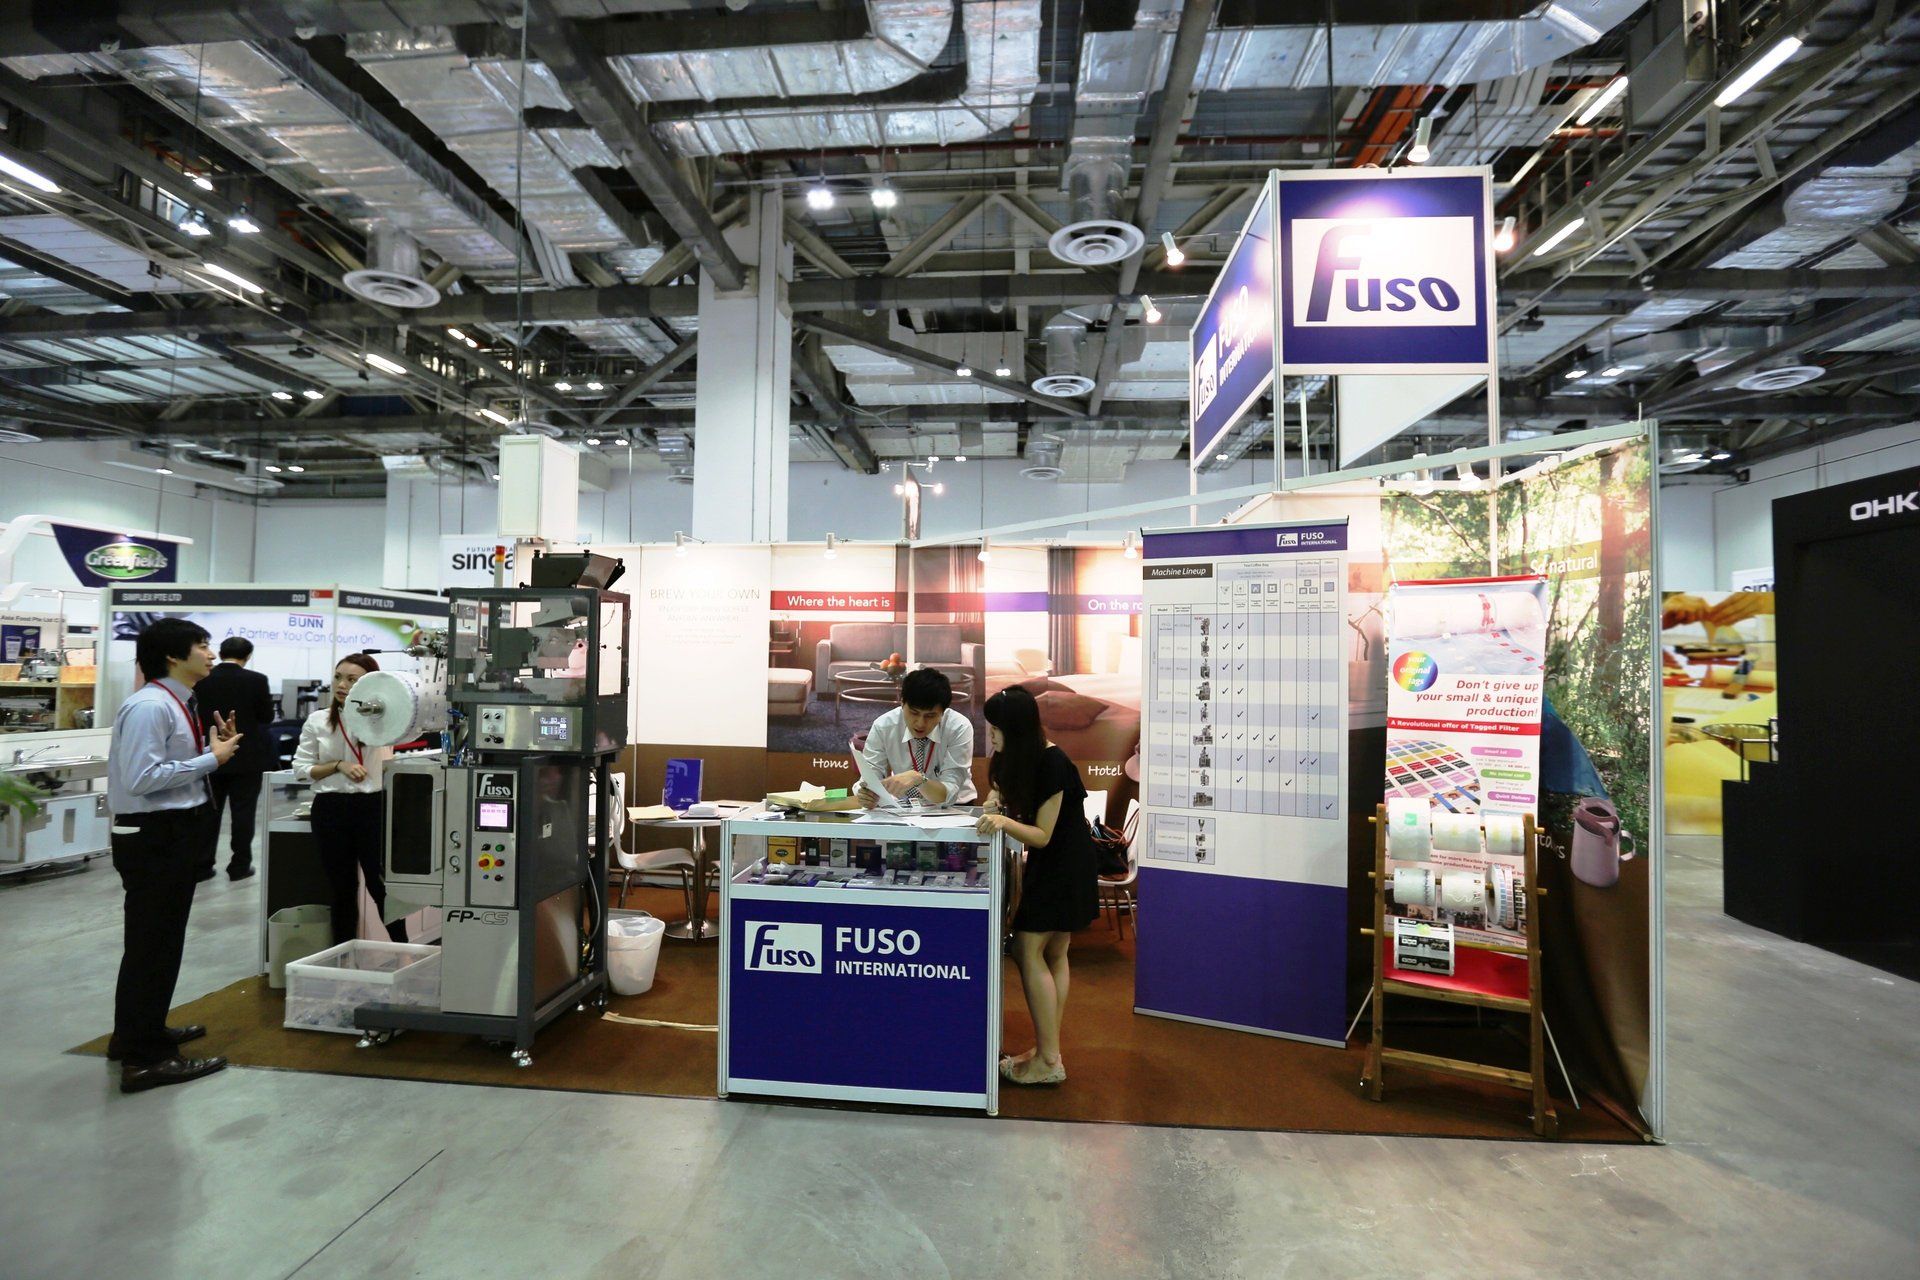 Fuso International @ Cafe Asia 2014. Booth designed and built by Essential Global Fairs.